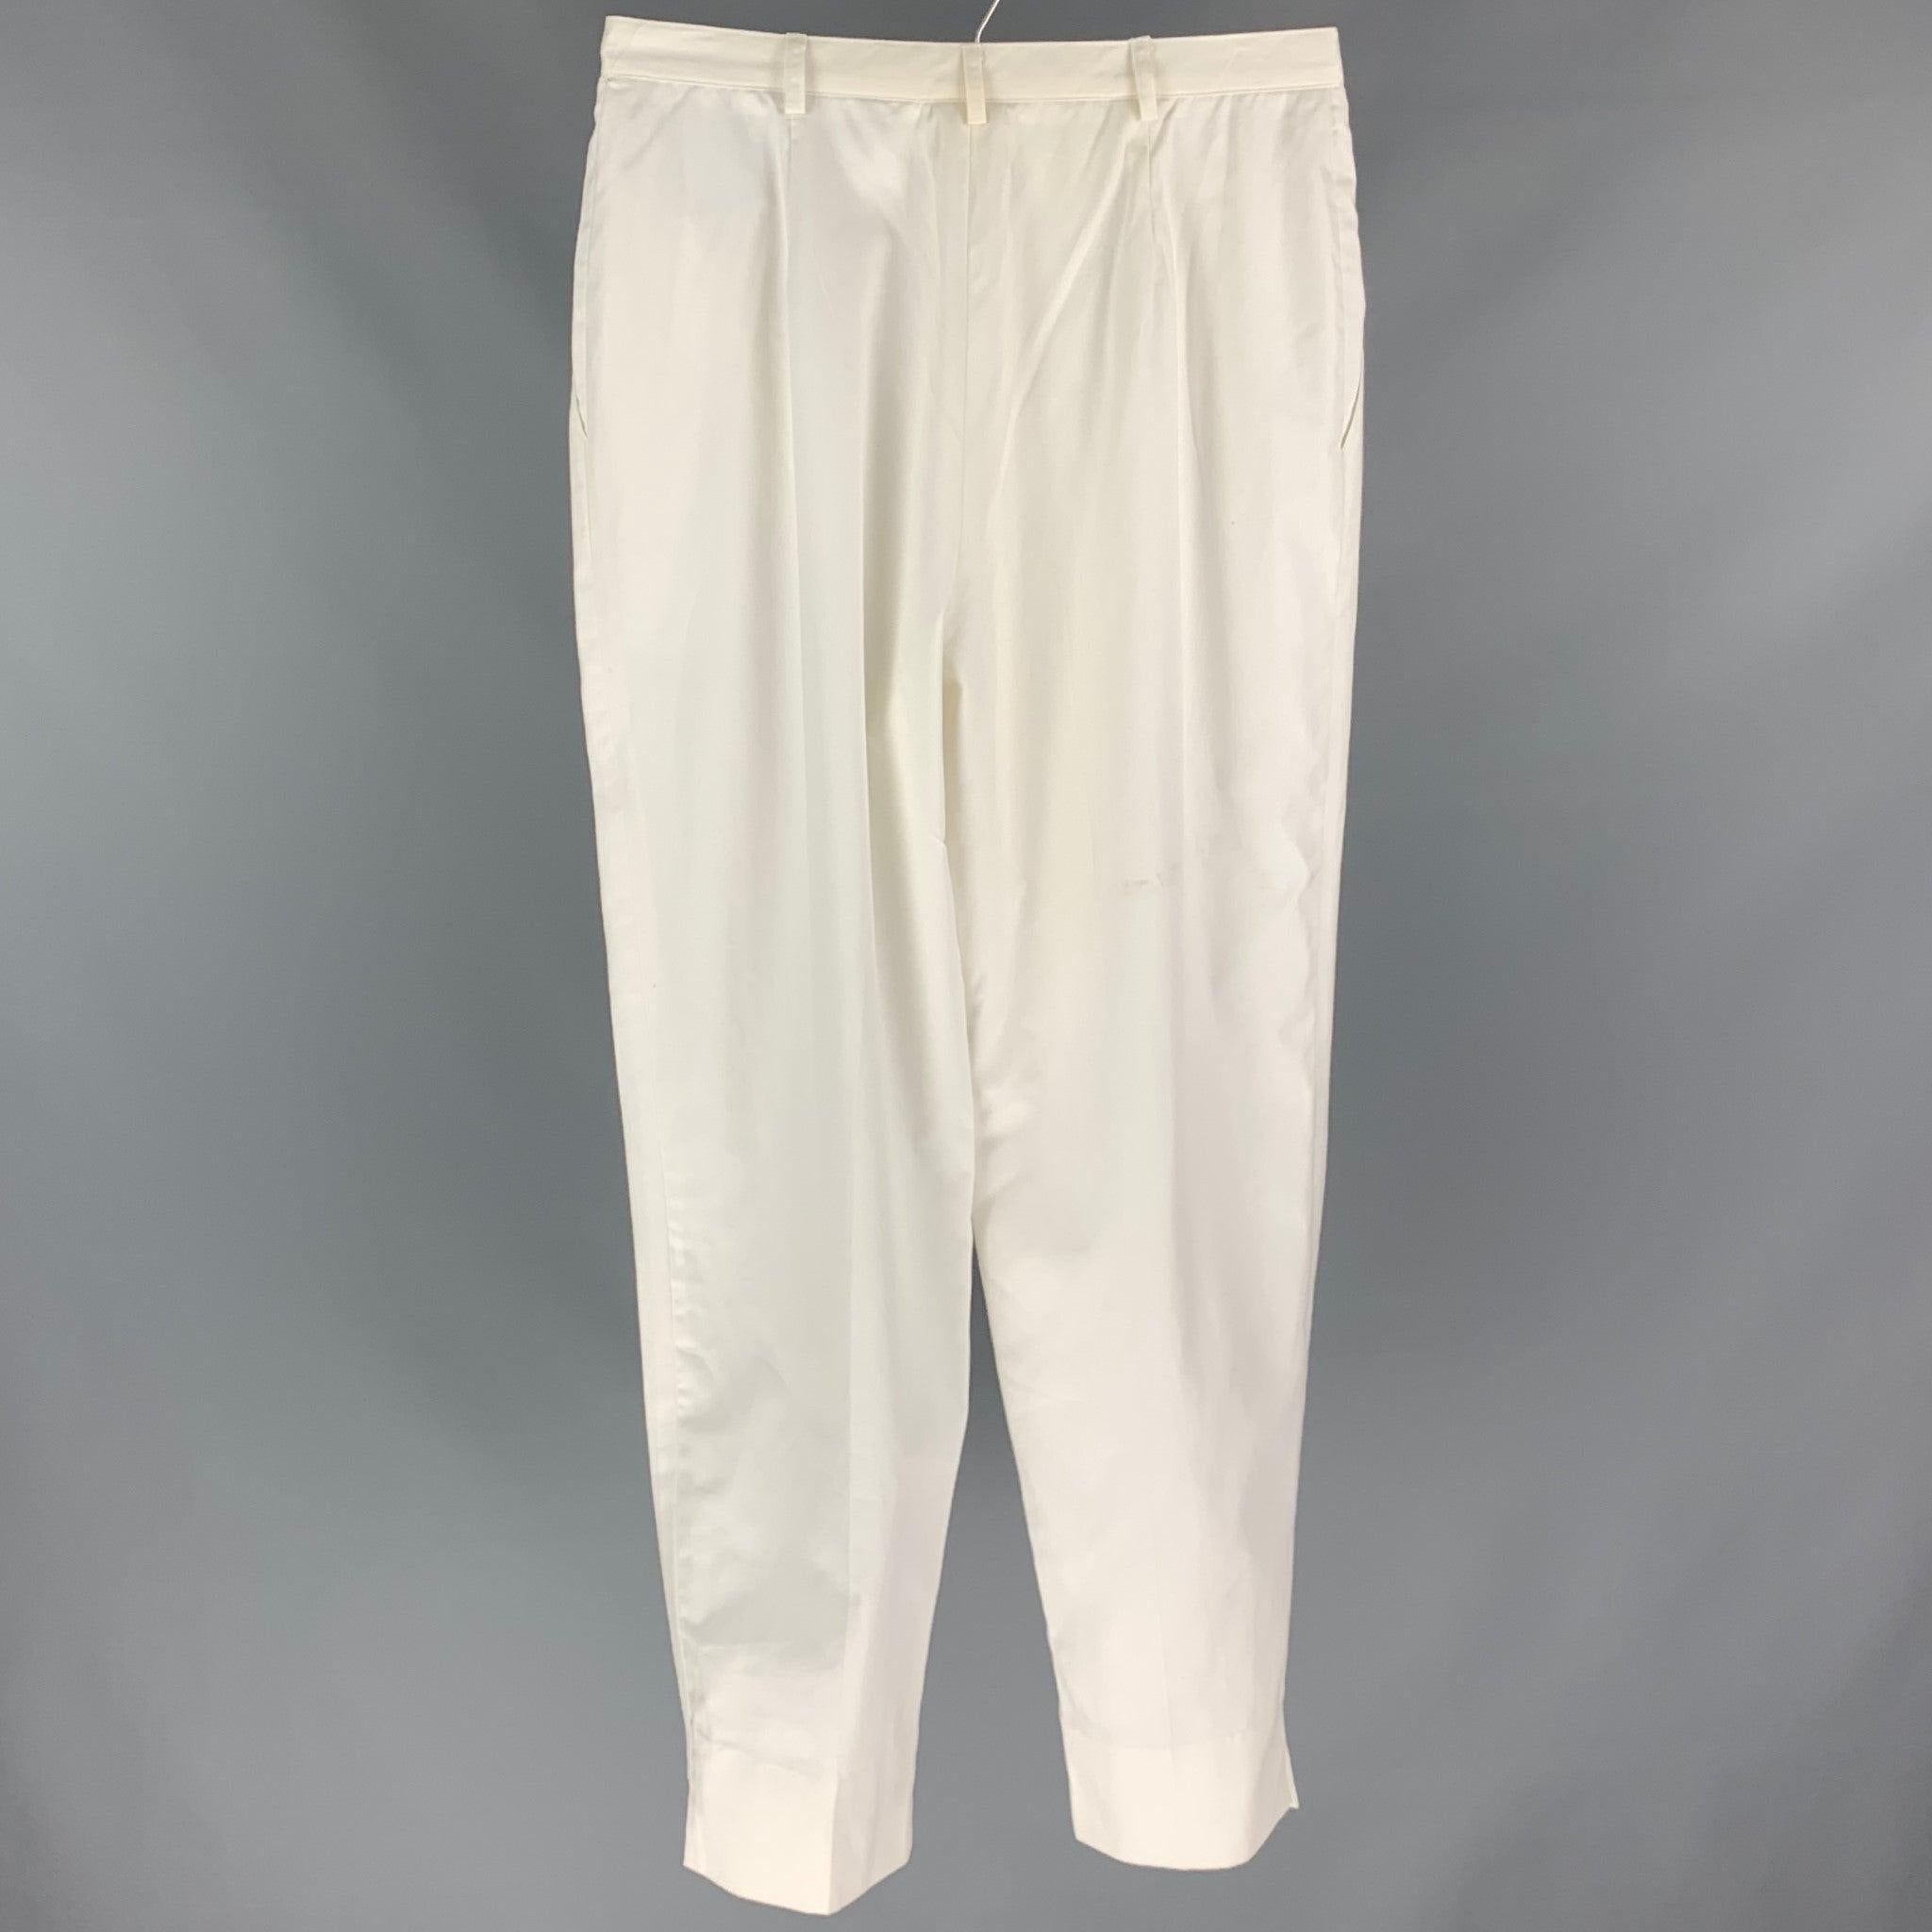 CHRISTIAN DIOR dress pants comes in a white material featuring a high waisted style,wide leg, pleated, and a zip fly closure. Made in USA.Good
Pre-Owned Condition. 

Marked:   14 

Measurements: 
  Waist: 31 inches  Rise: 14.5 inches  Inseam: 29